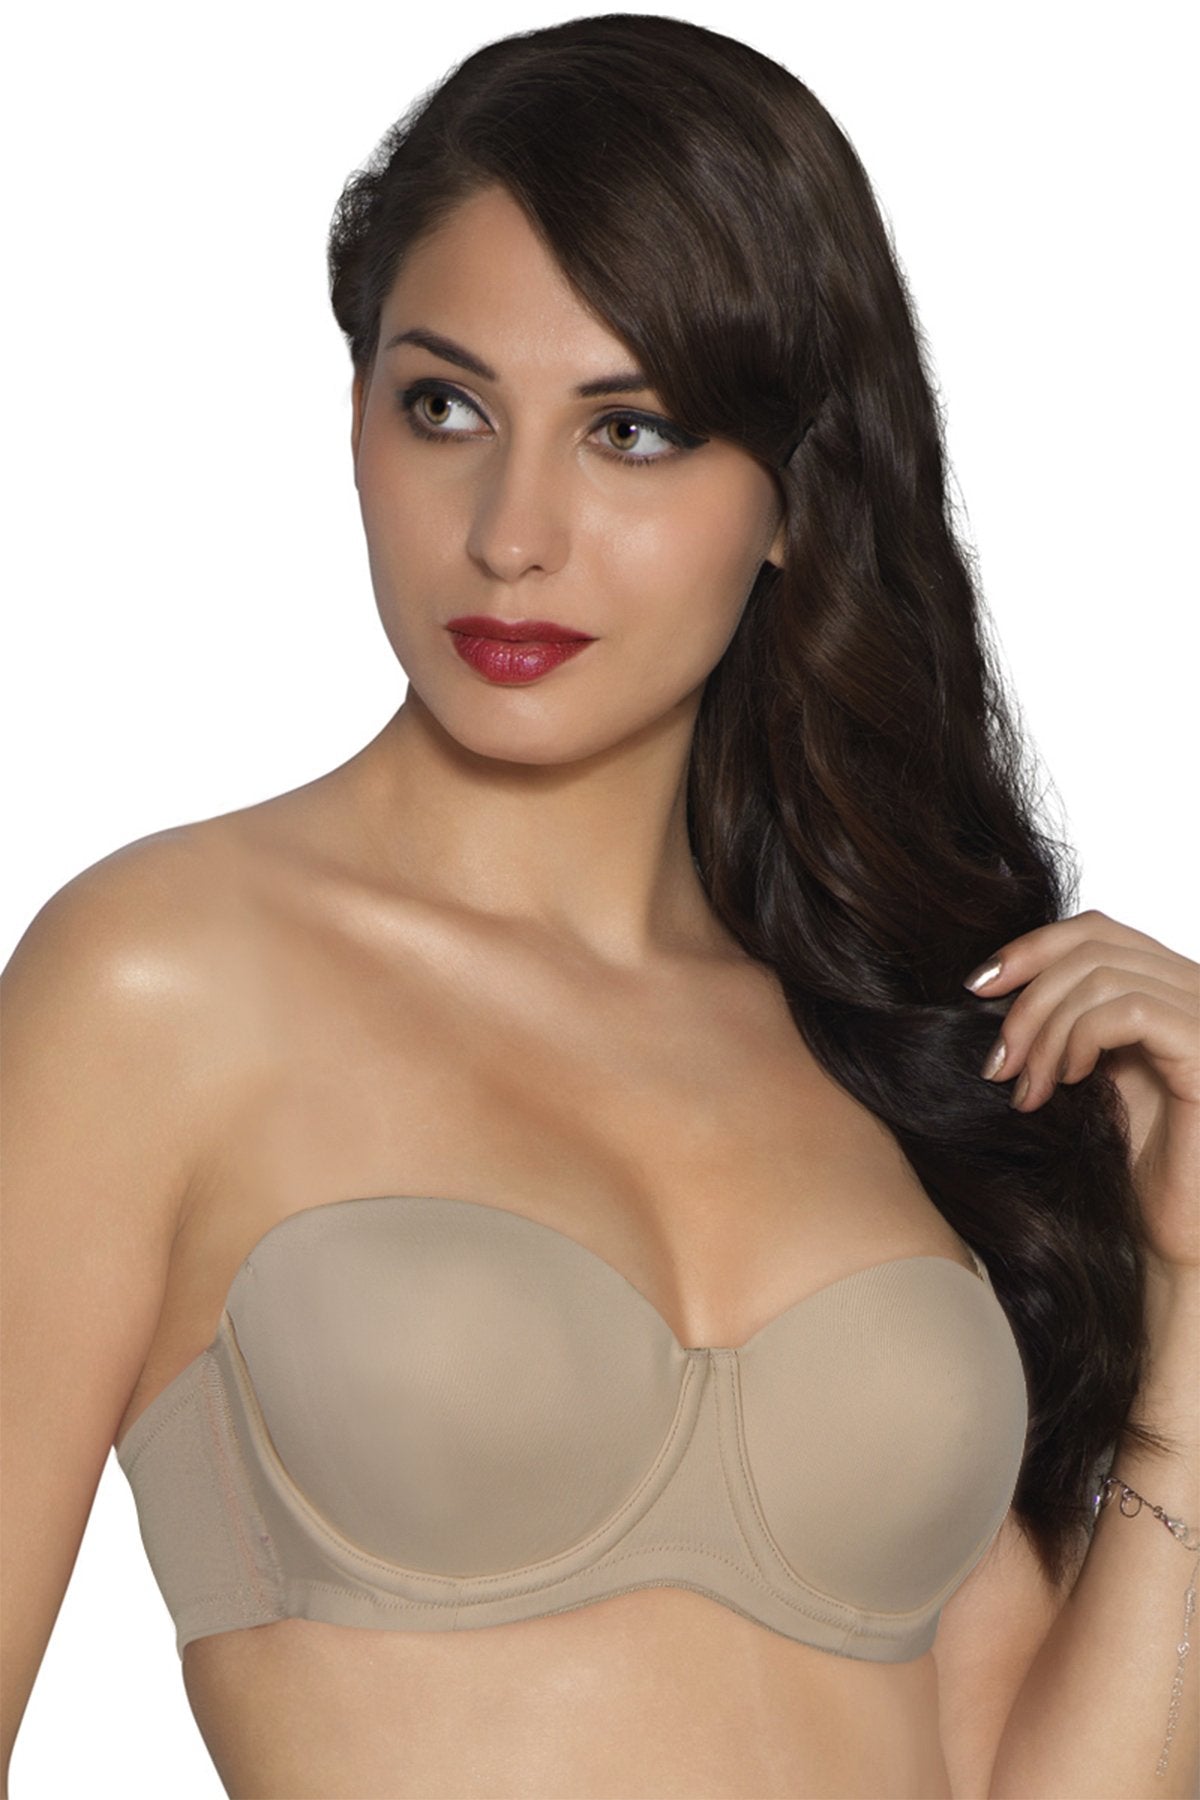 Convertible, Strapless and Push-Up Strapless Bras for Women